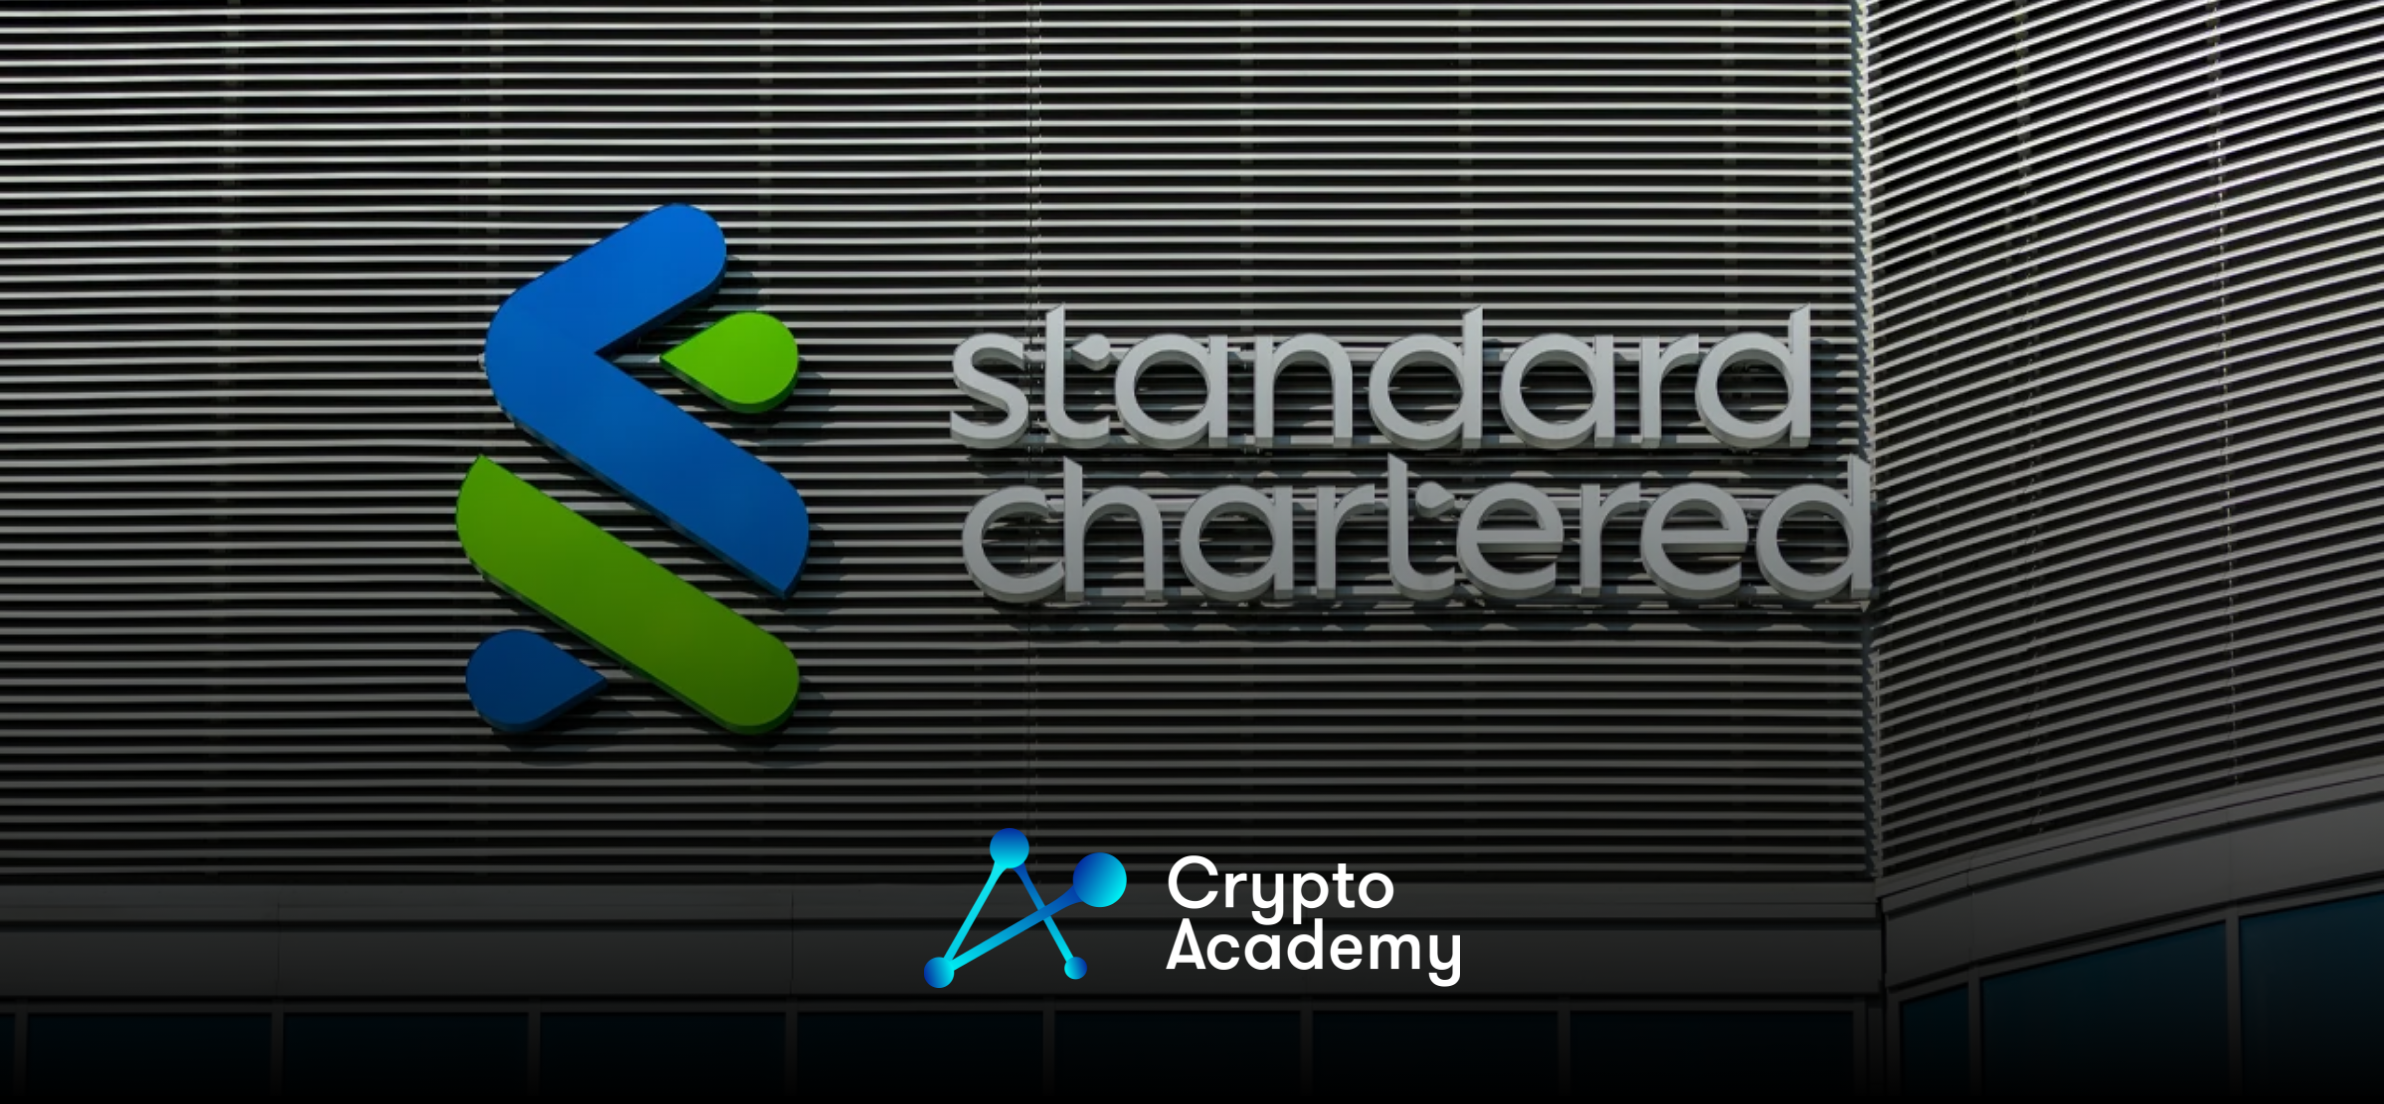 Standard Chartered: ETH to Reach $8,000 By 2026